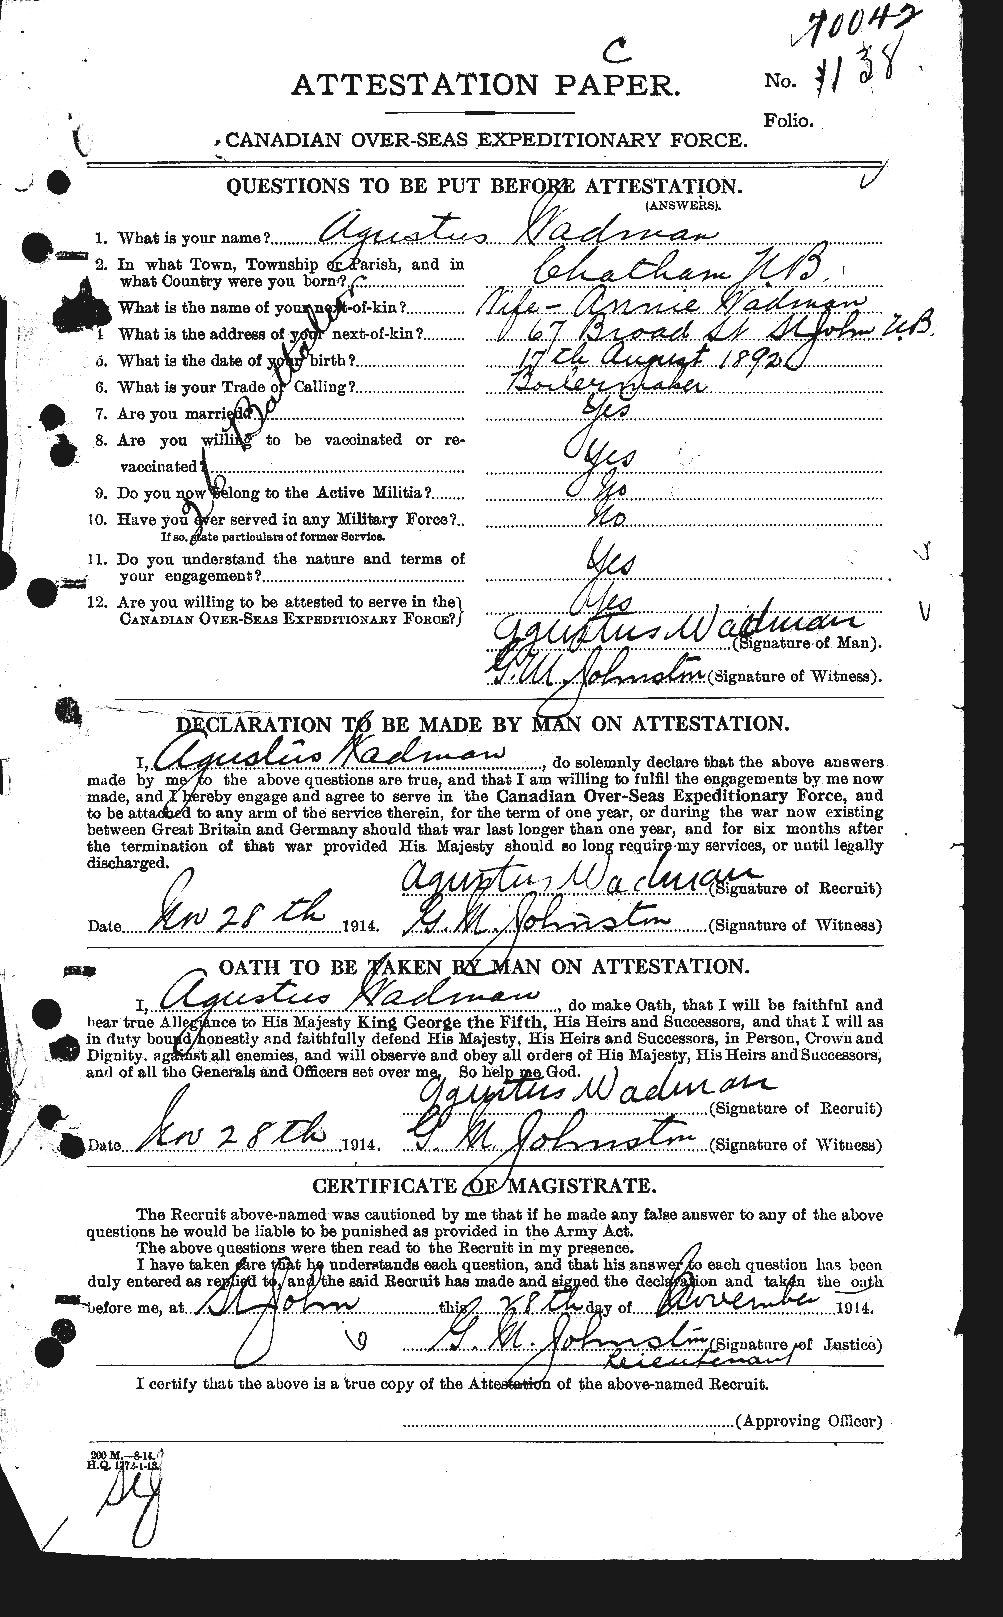 Personnel Records of the First World War - CEF 651372a